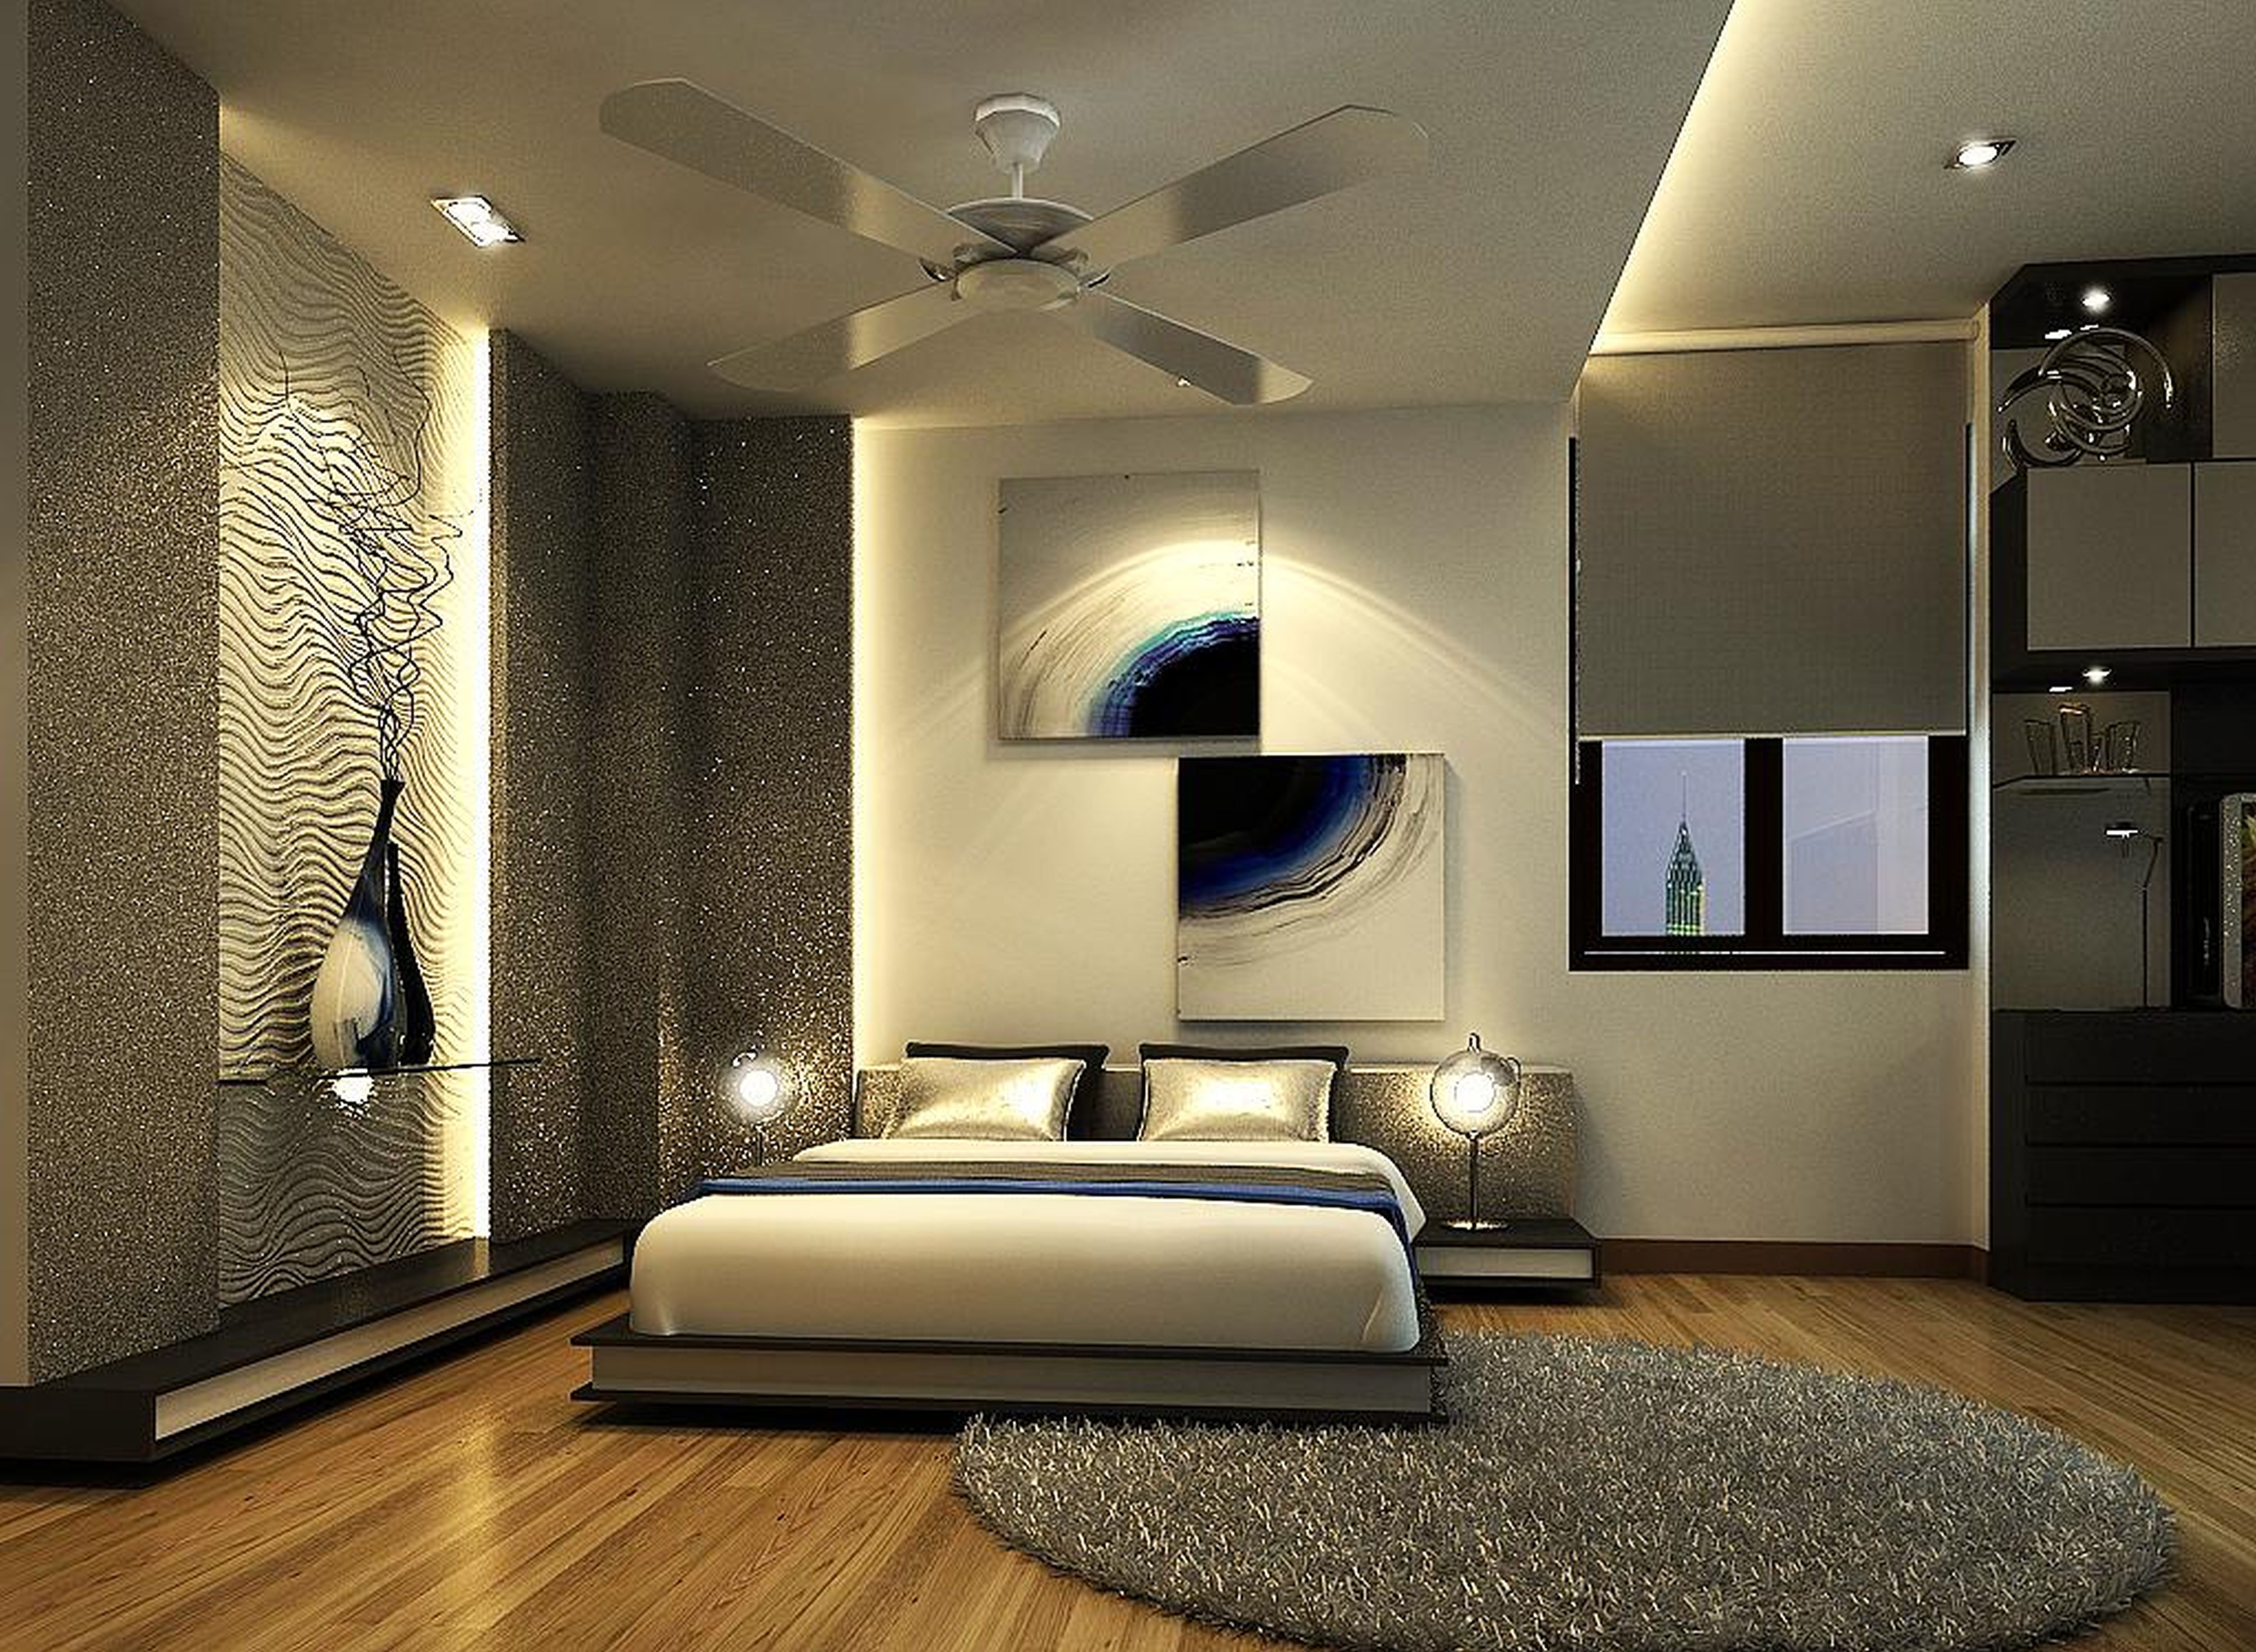 Modern Bedroom Decor Ideas: Transform Your Space With Fresh Ideas